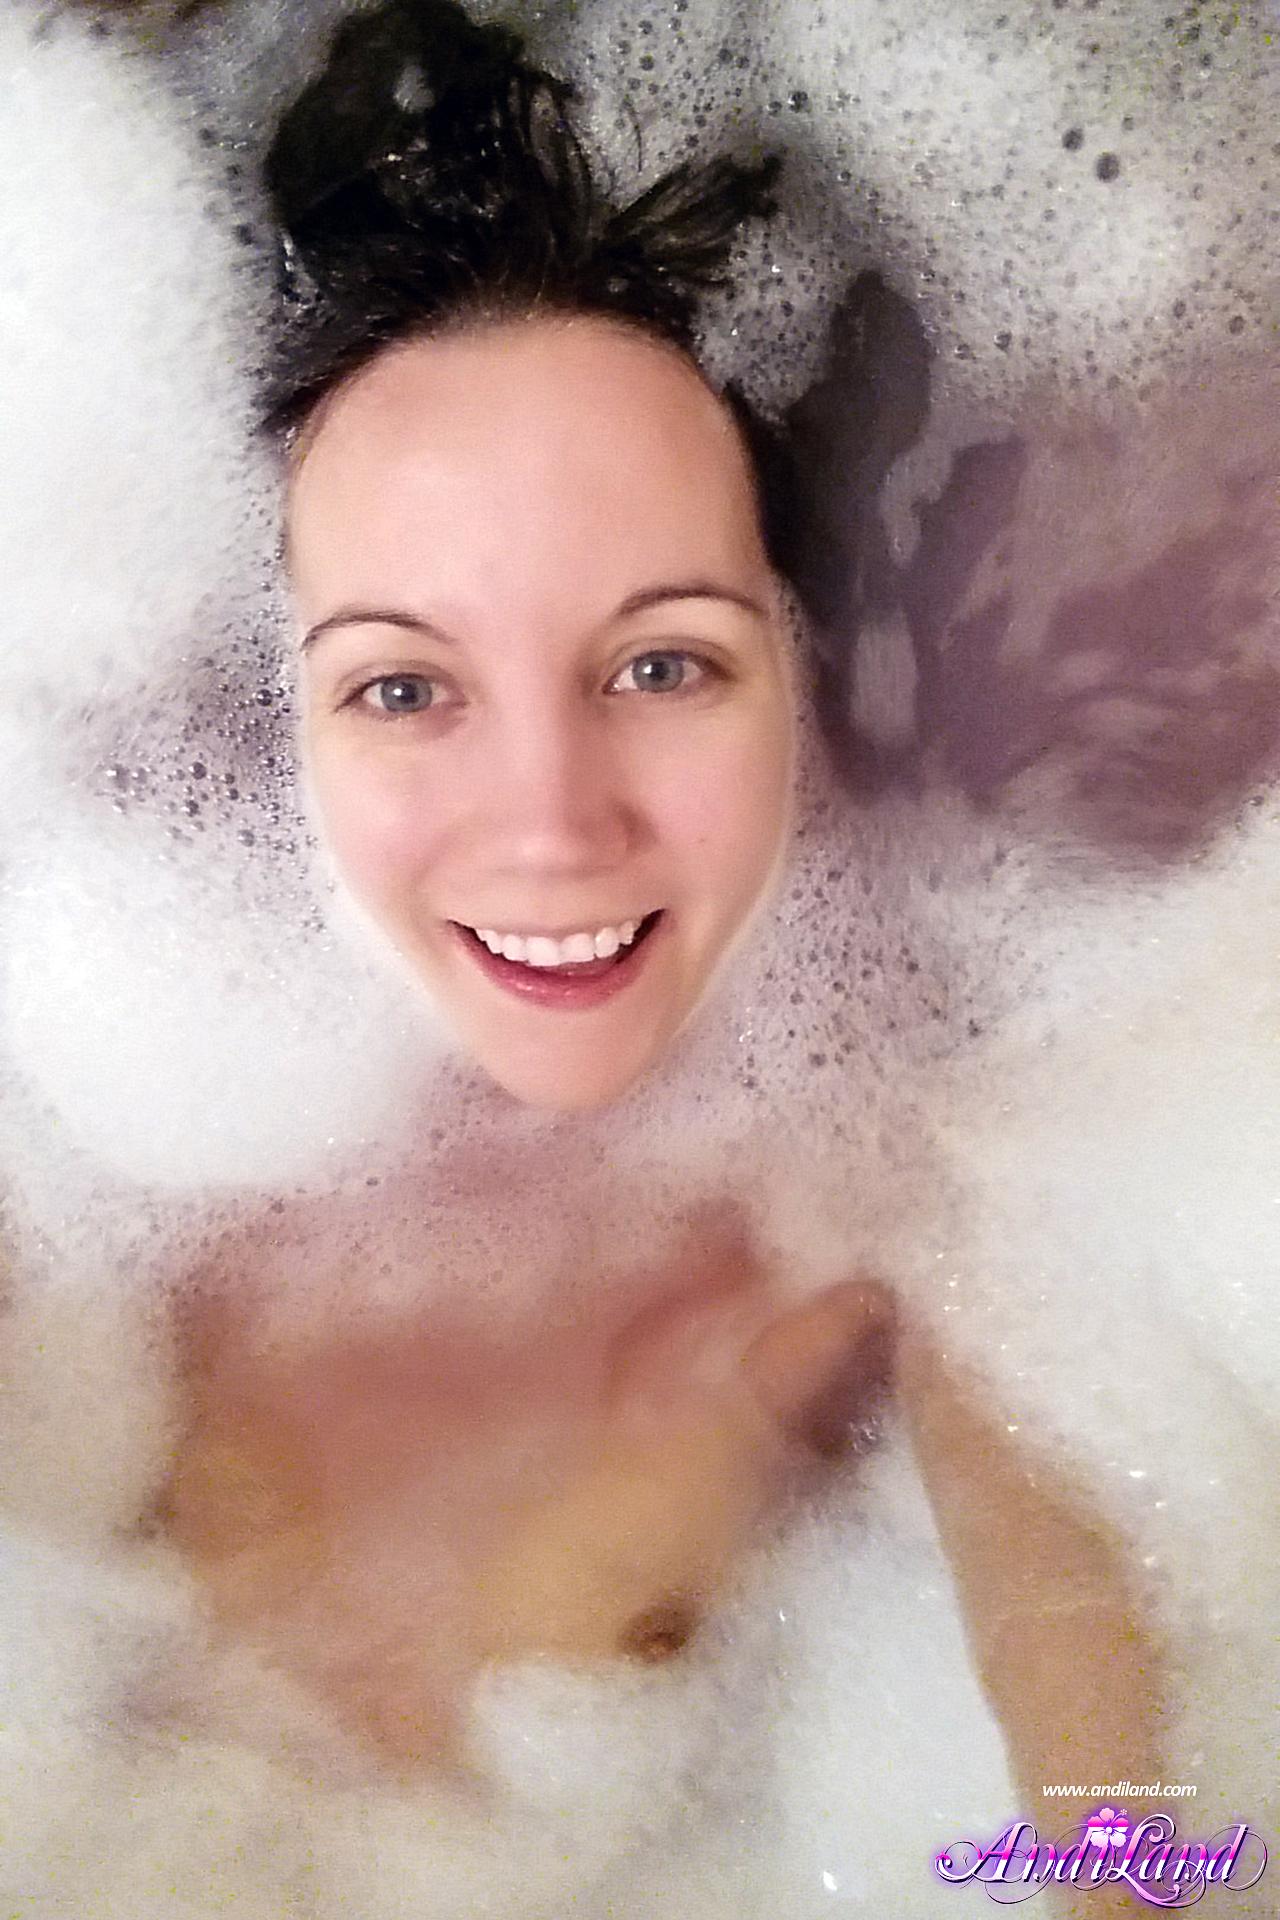 Andi Land takes some selfies for you in the bath #53135426